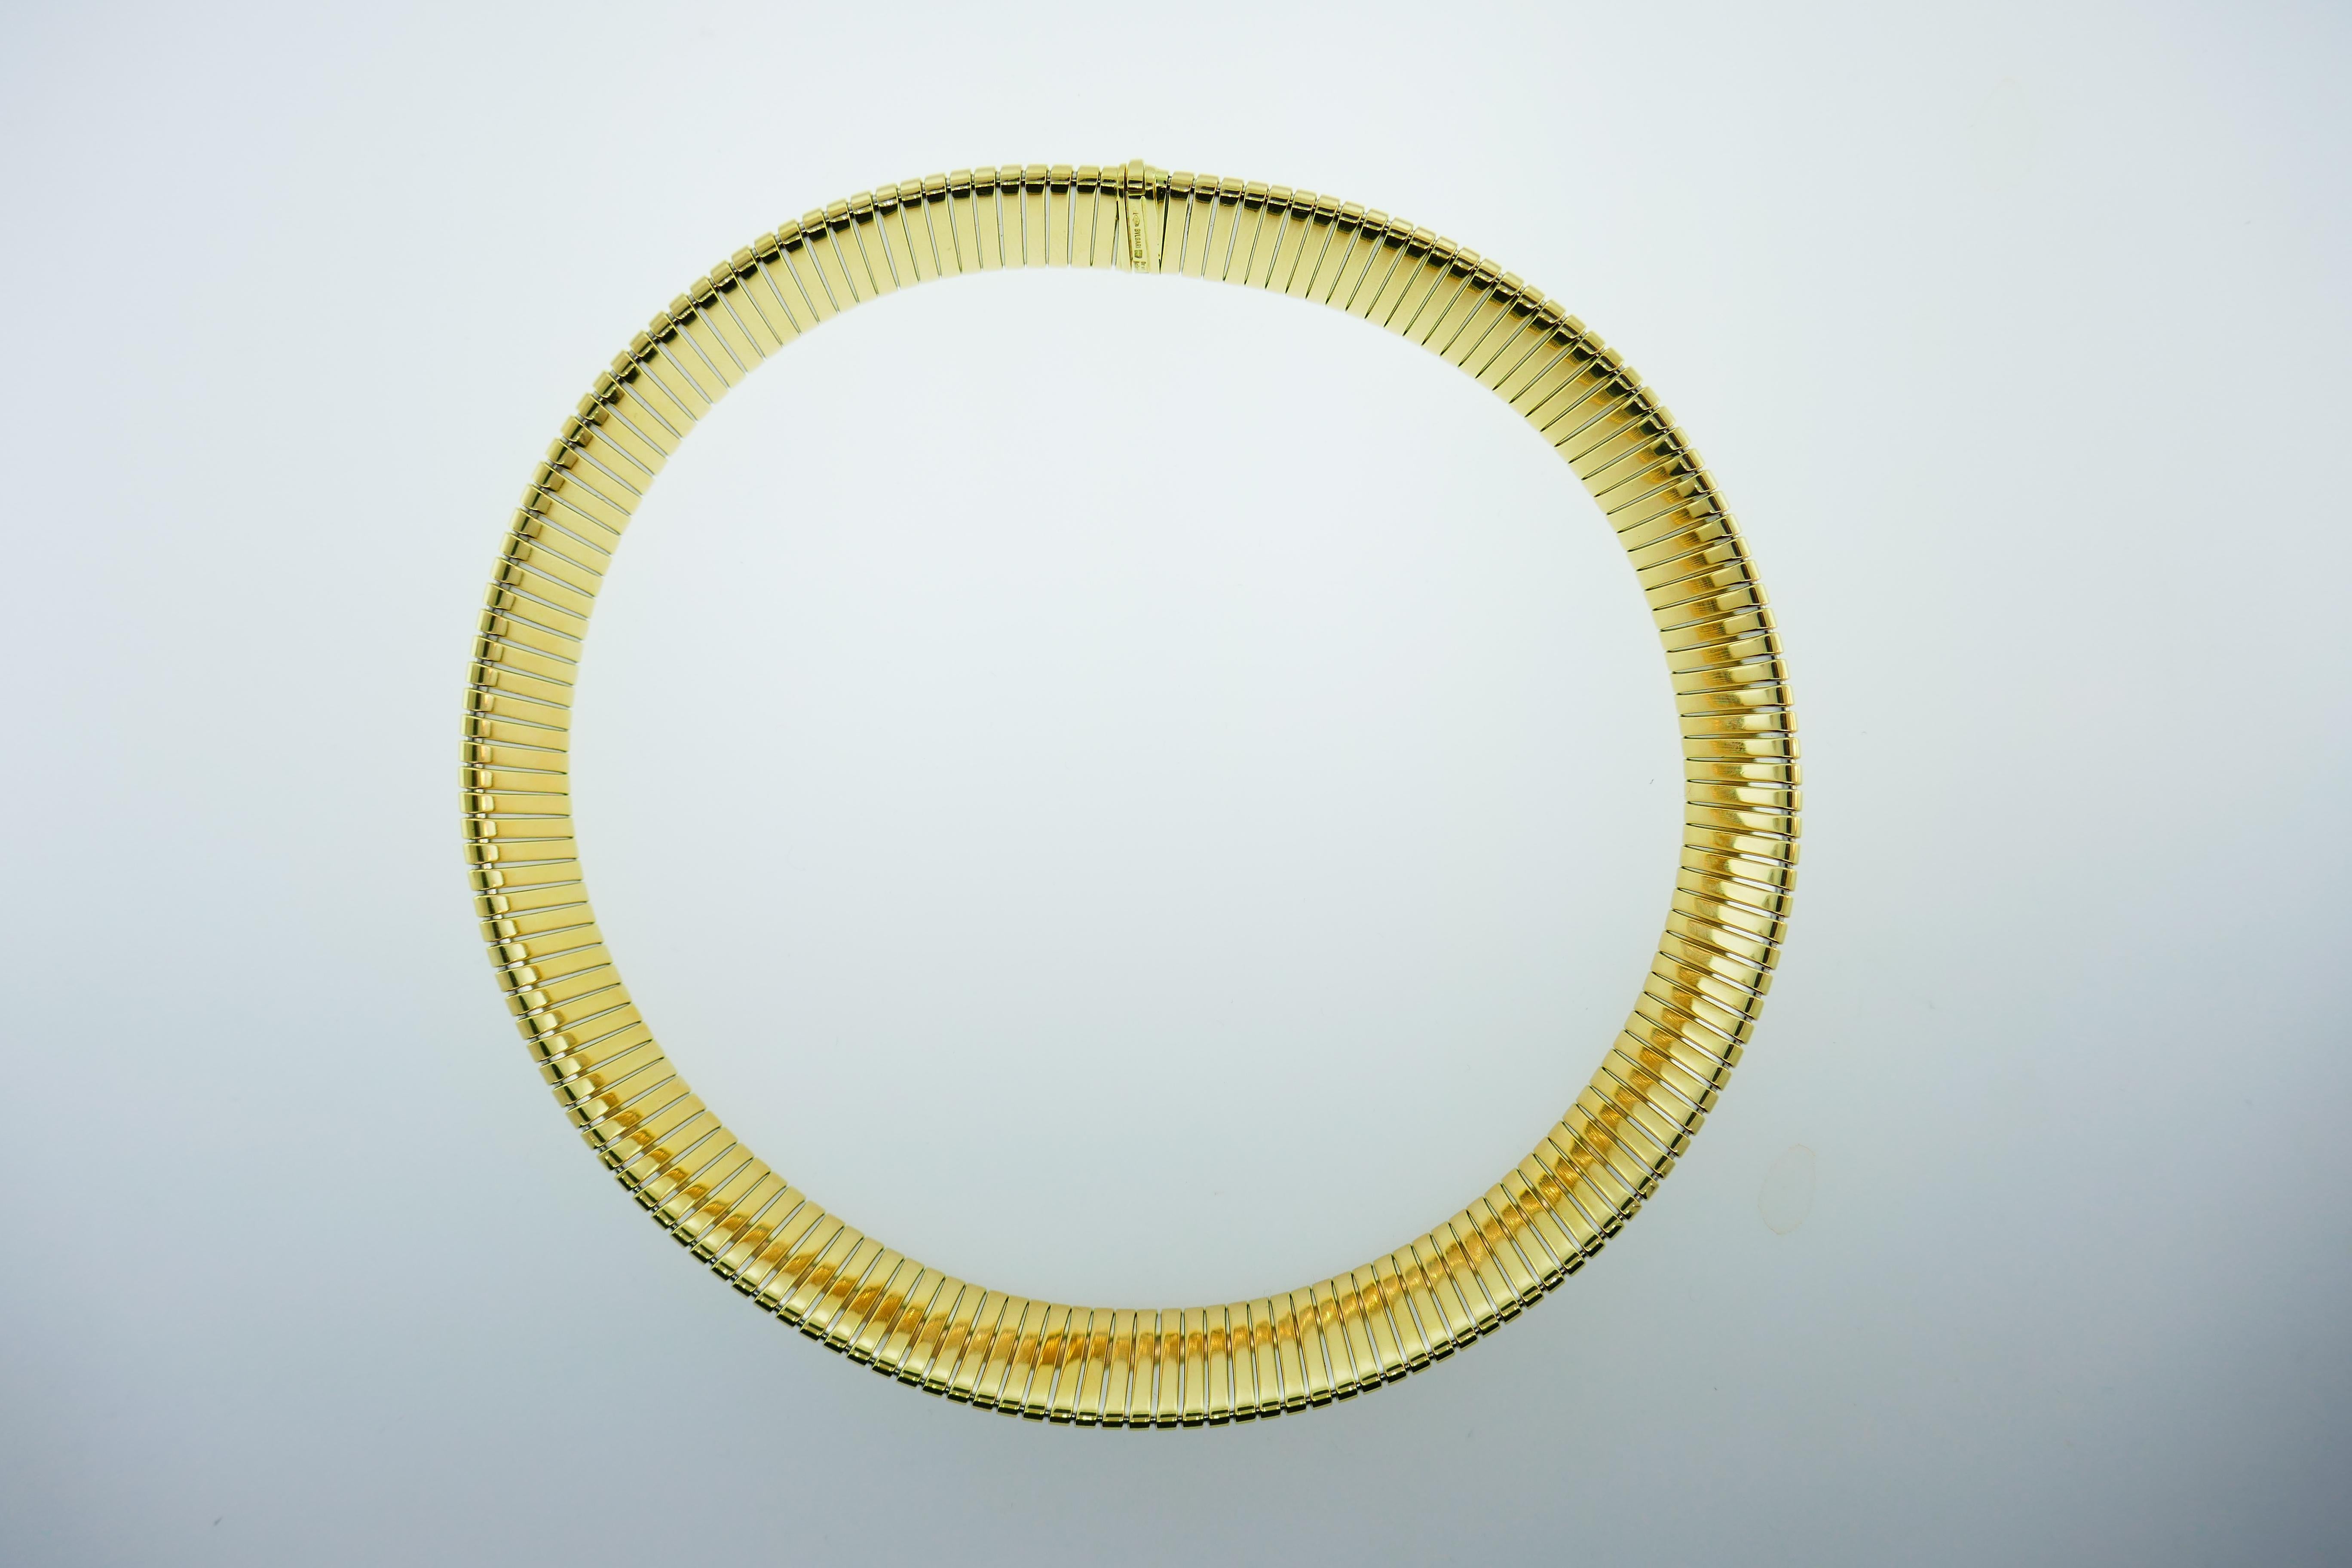 Bvlgari Italy 18k Yellow Gold Tubogas Collection Choker Necklace Circa 1980s

Here is your chance to purchase a beautiful and highly collectible designer choker necklace.  Truly a great piece at a great price! 

Weight: 106.4 grams

Dimensions: 15